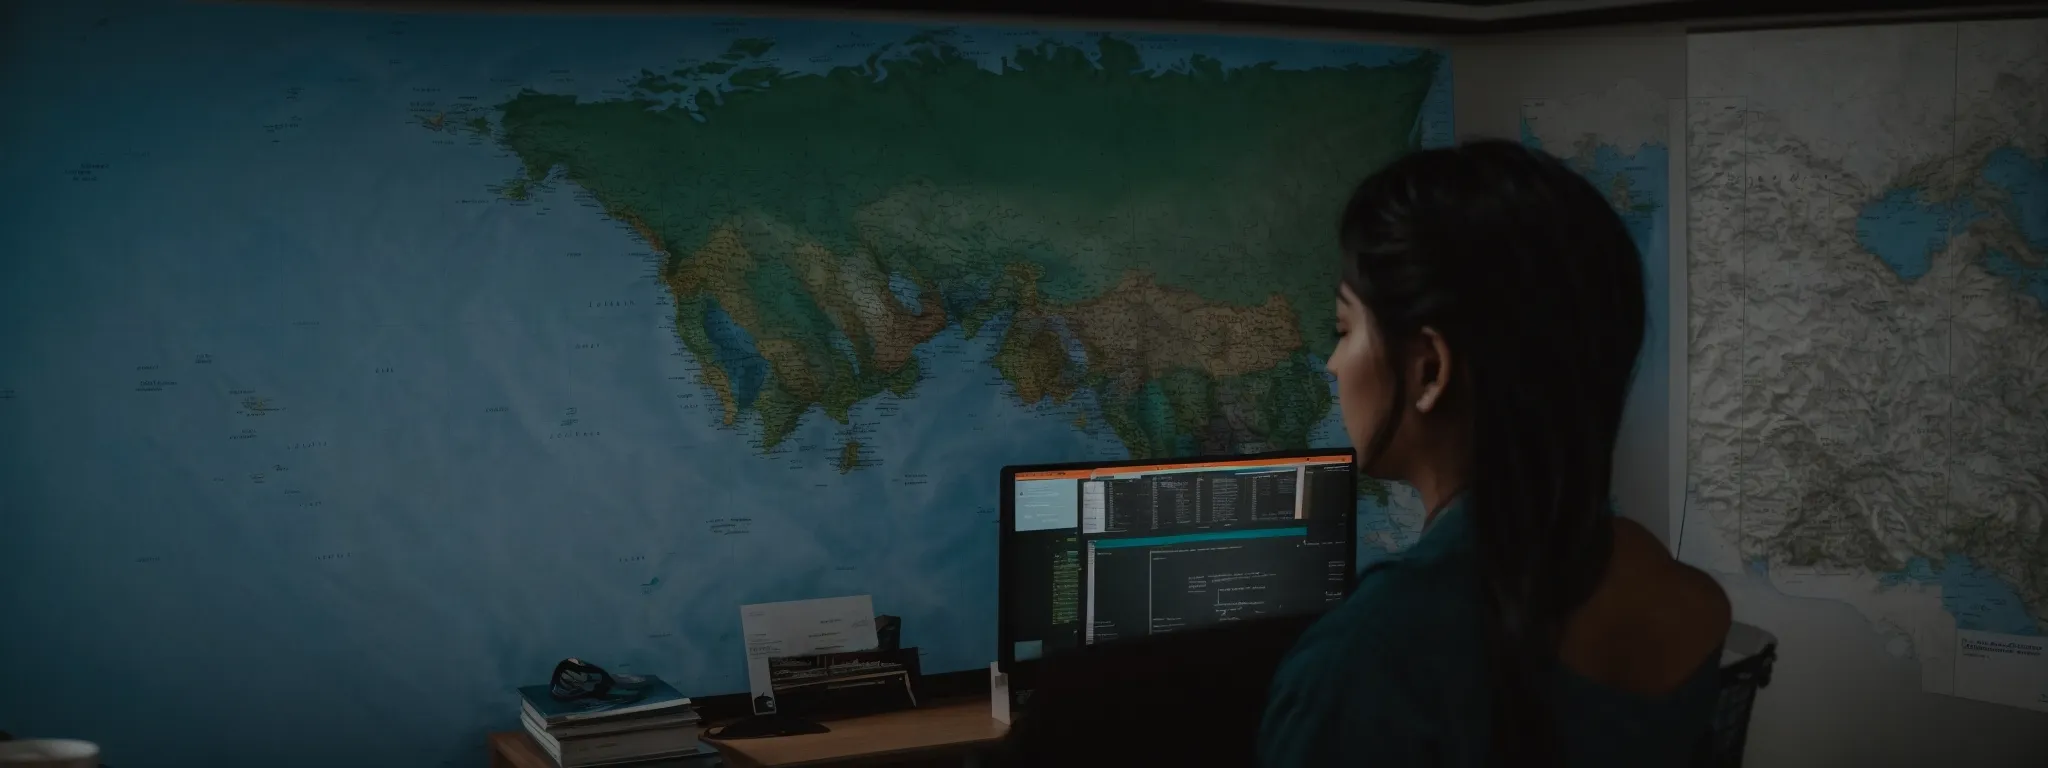 a person sitting before a computer with a world map displayed on the screen, symbolizing global digital marketing strategies.